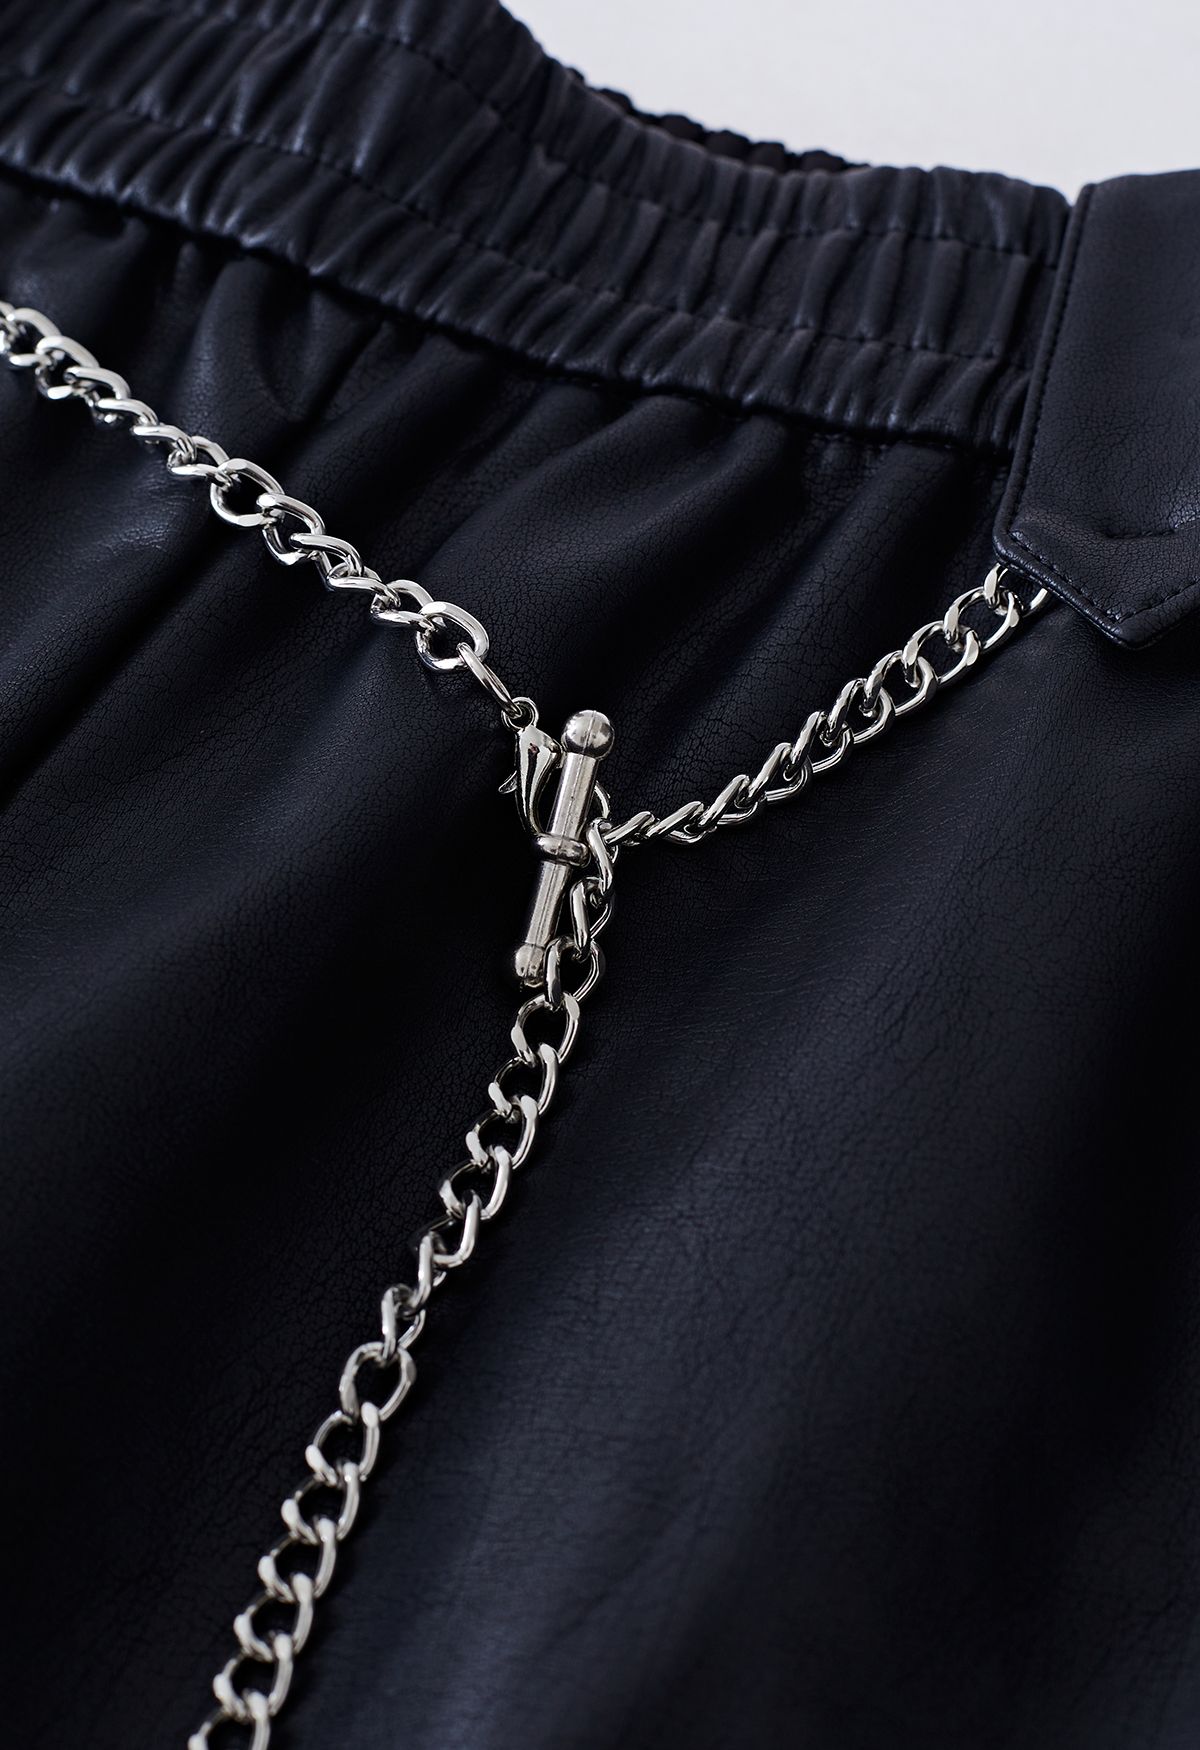 Silver Chain Faux Leather Shorts in Black